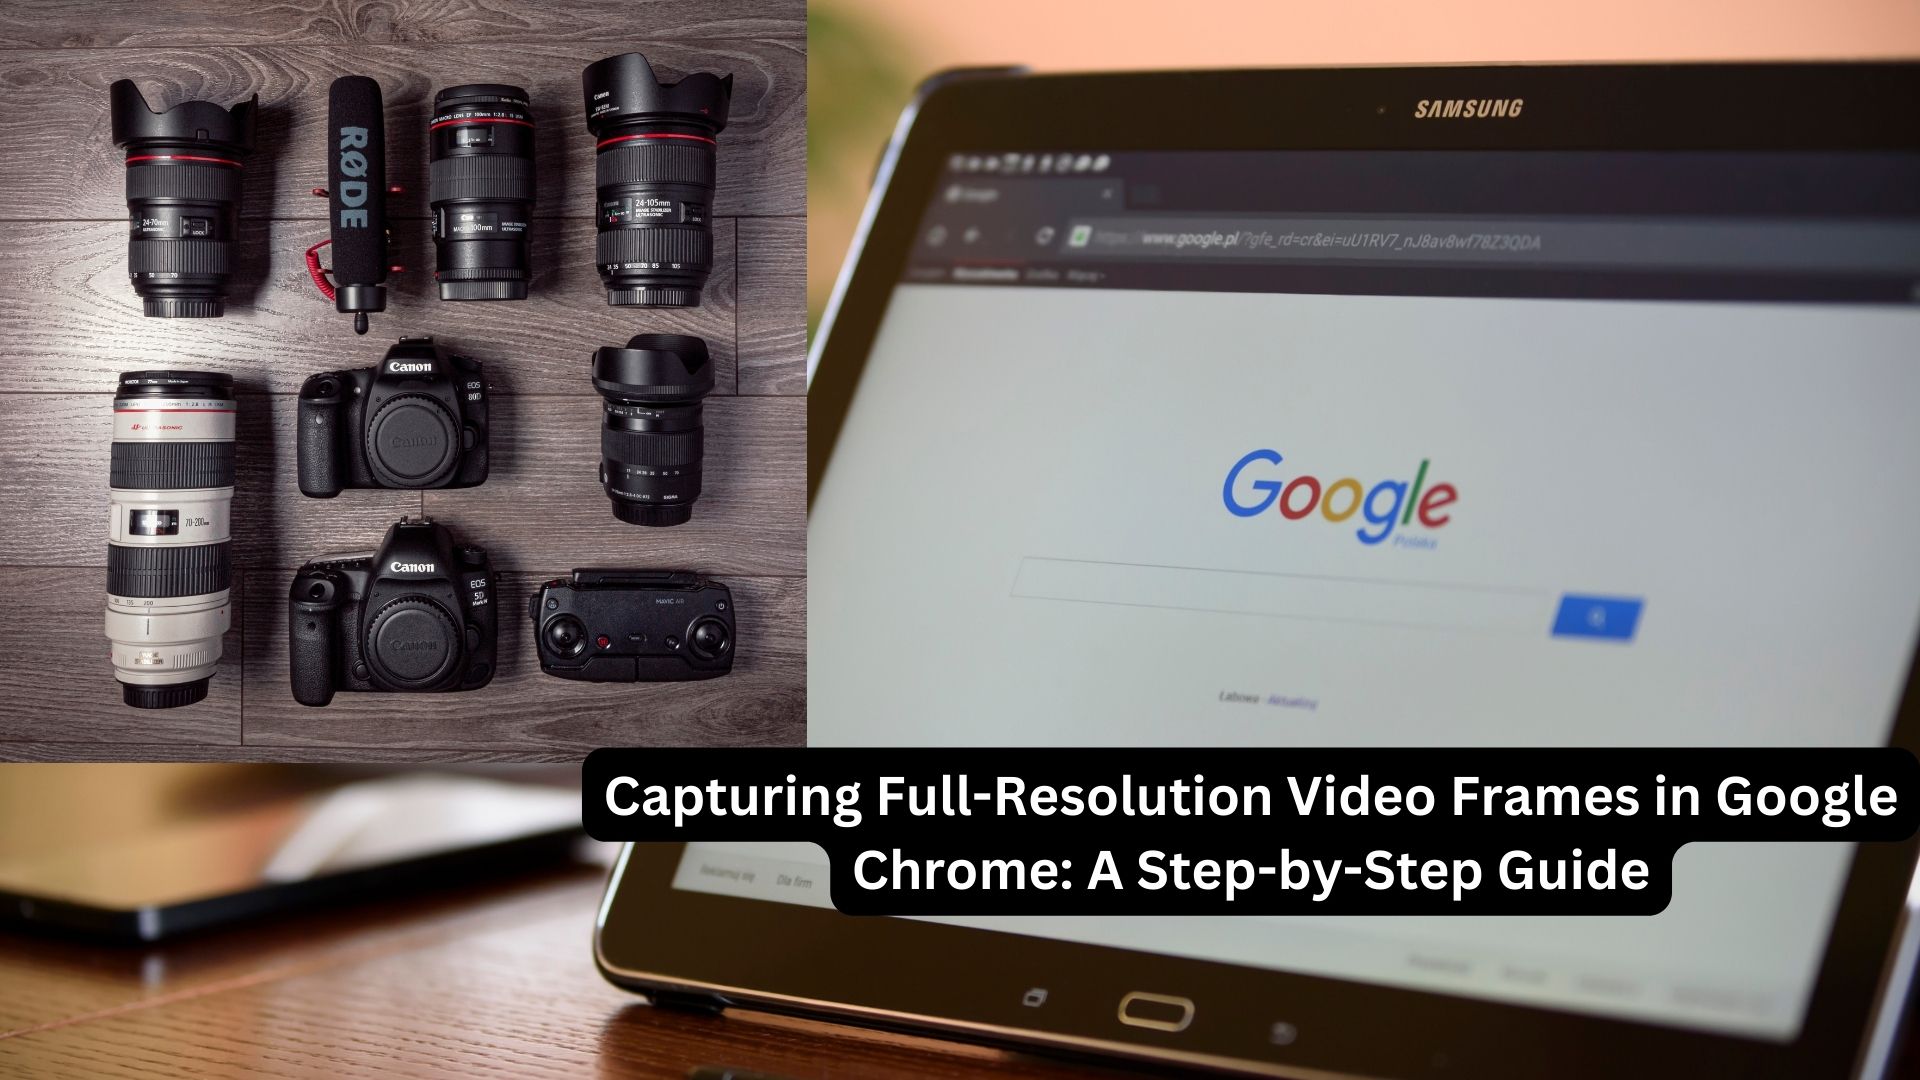 Capturing Full-Resolution Video Frames in Google Chrome: A Step-by-Step Guide